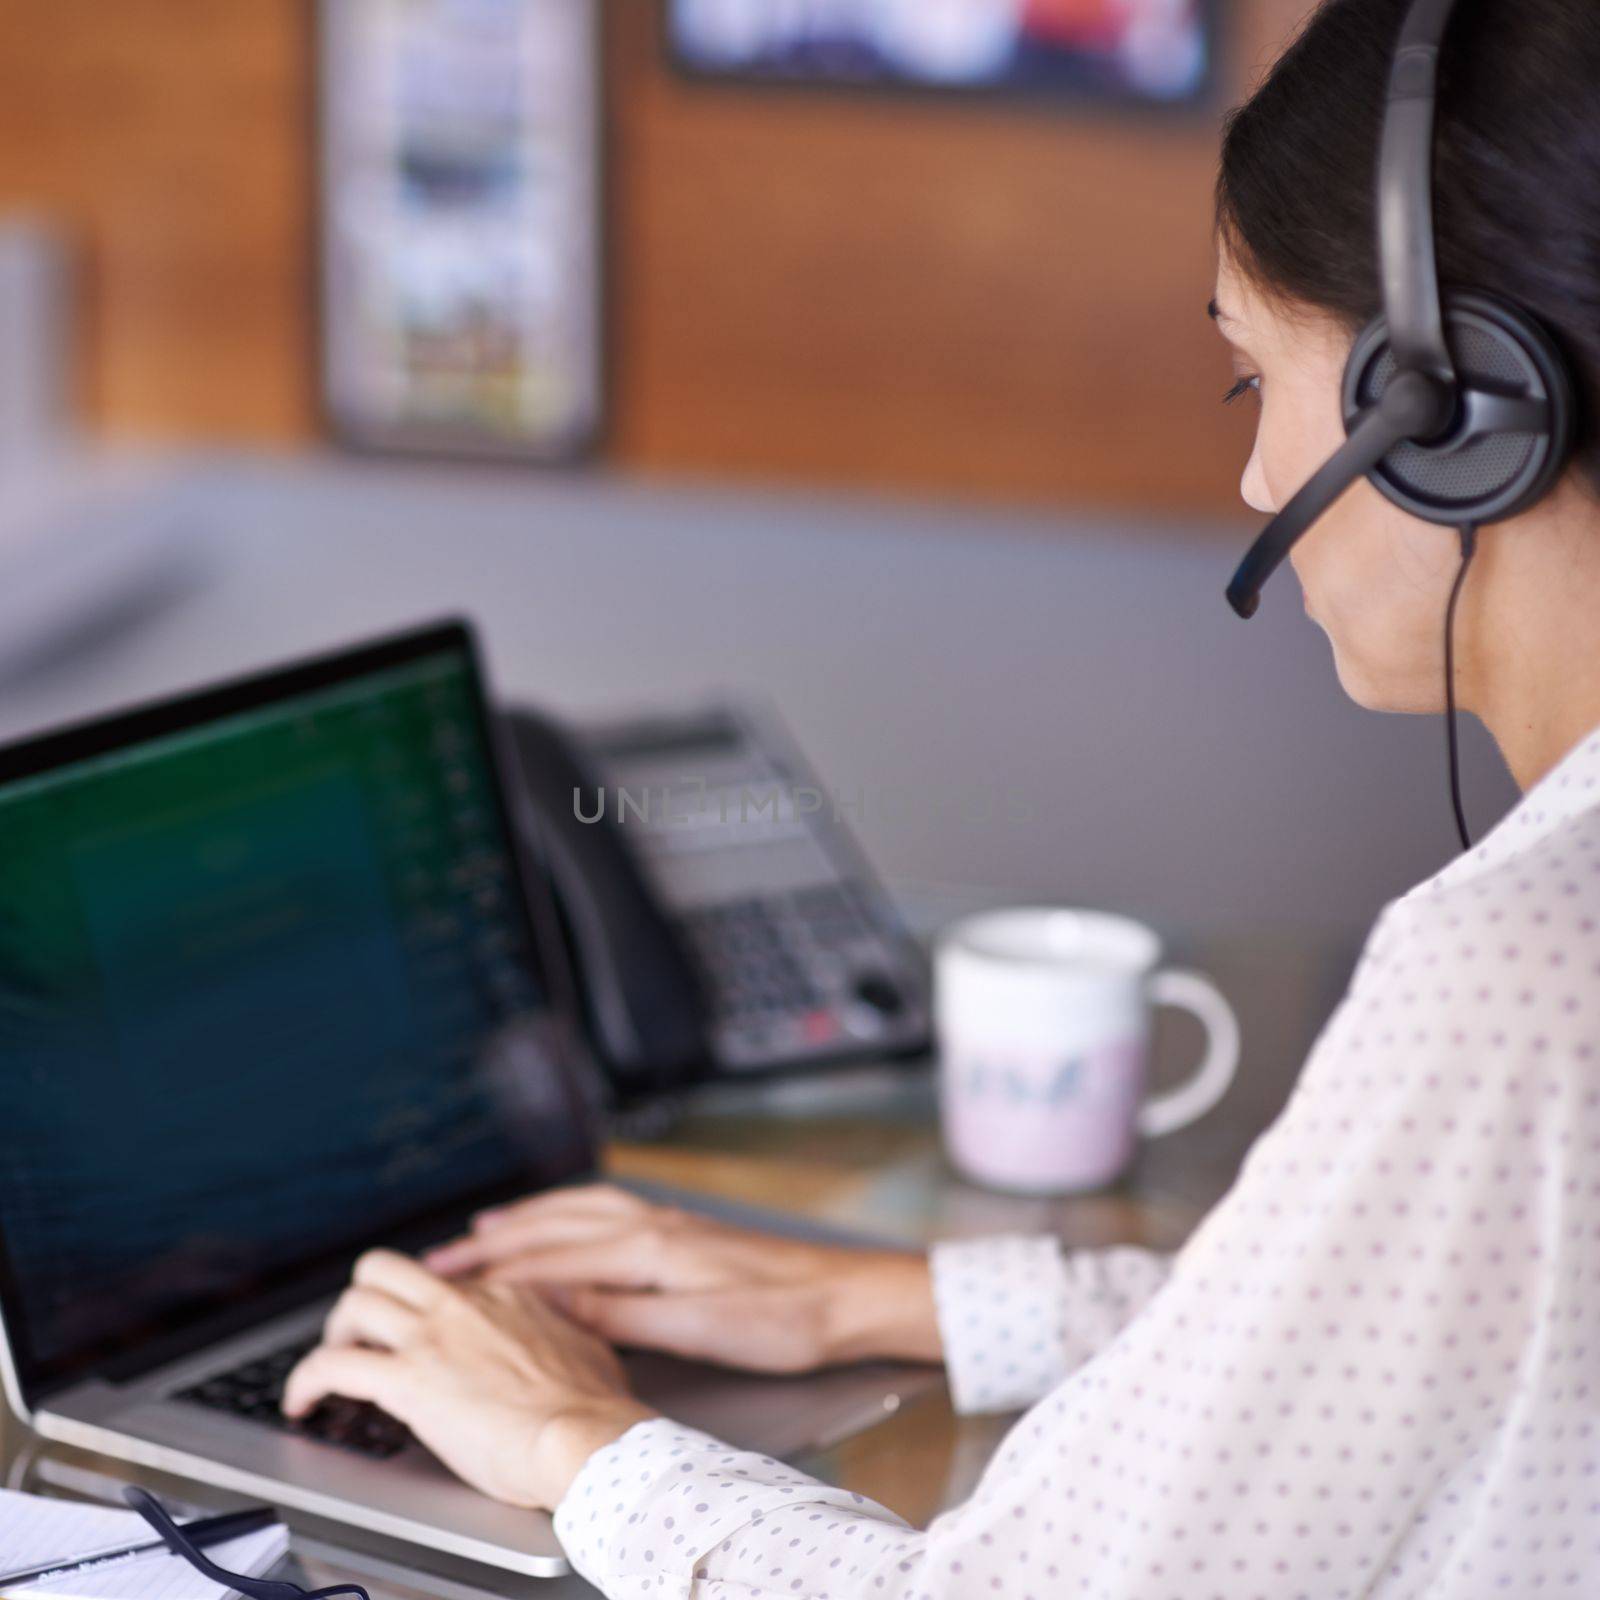 Taking your call. an attractive young businesswoman working on a laptop while wearing a headset